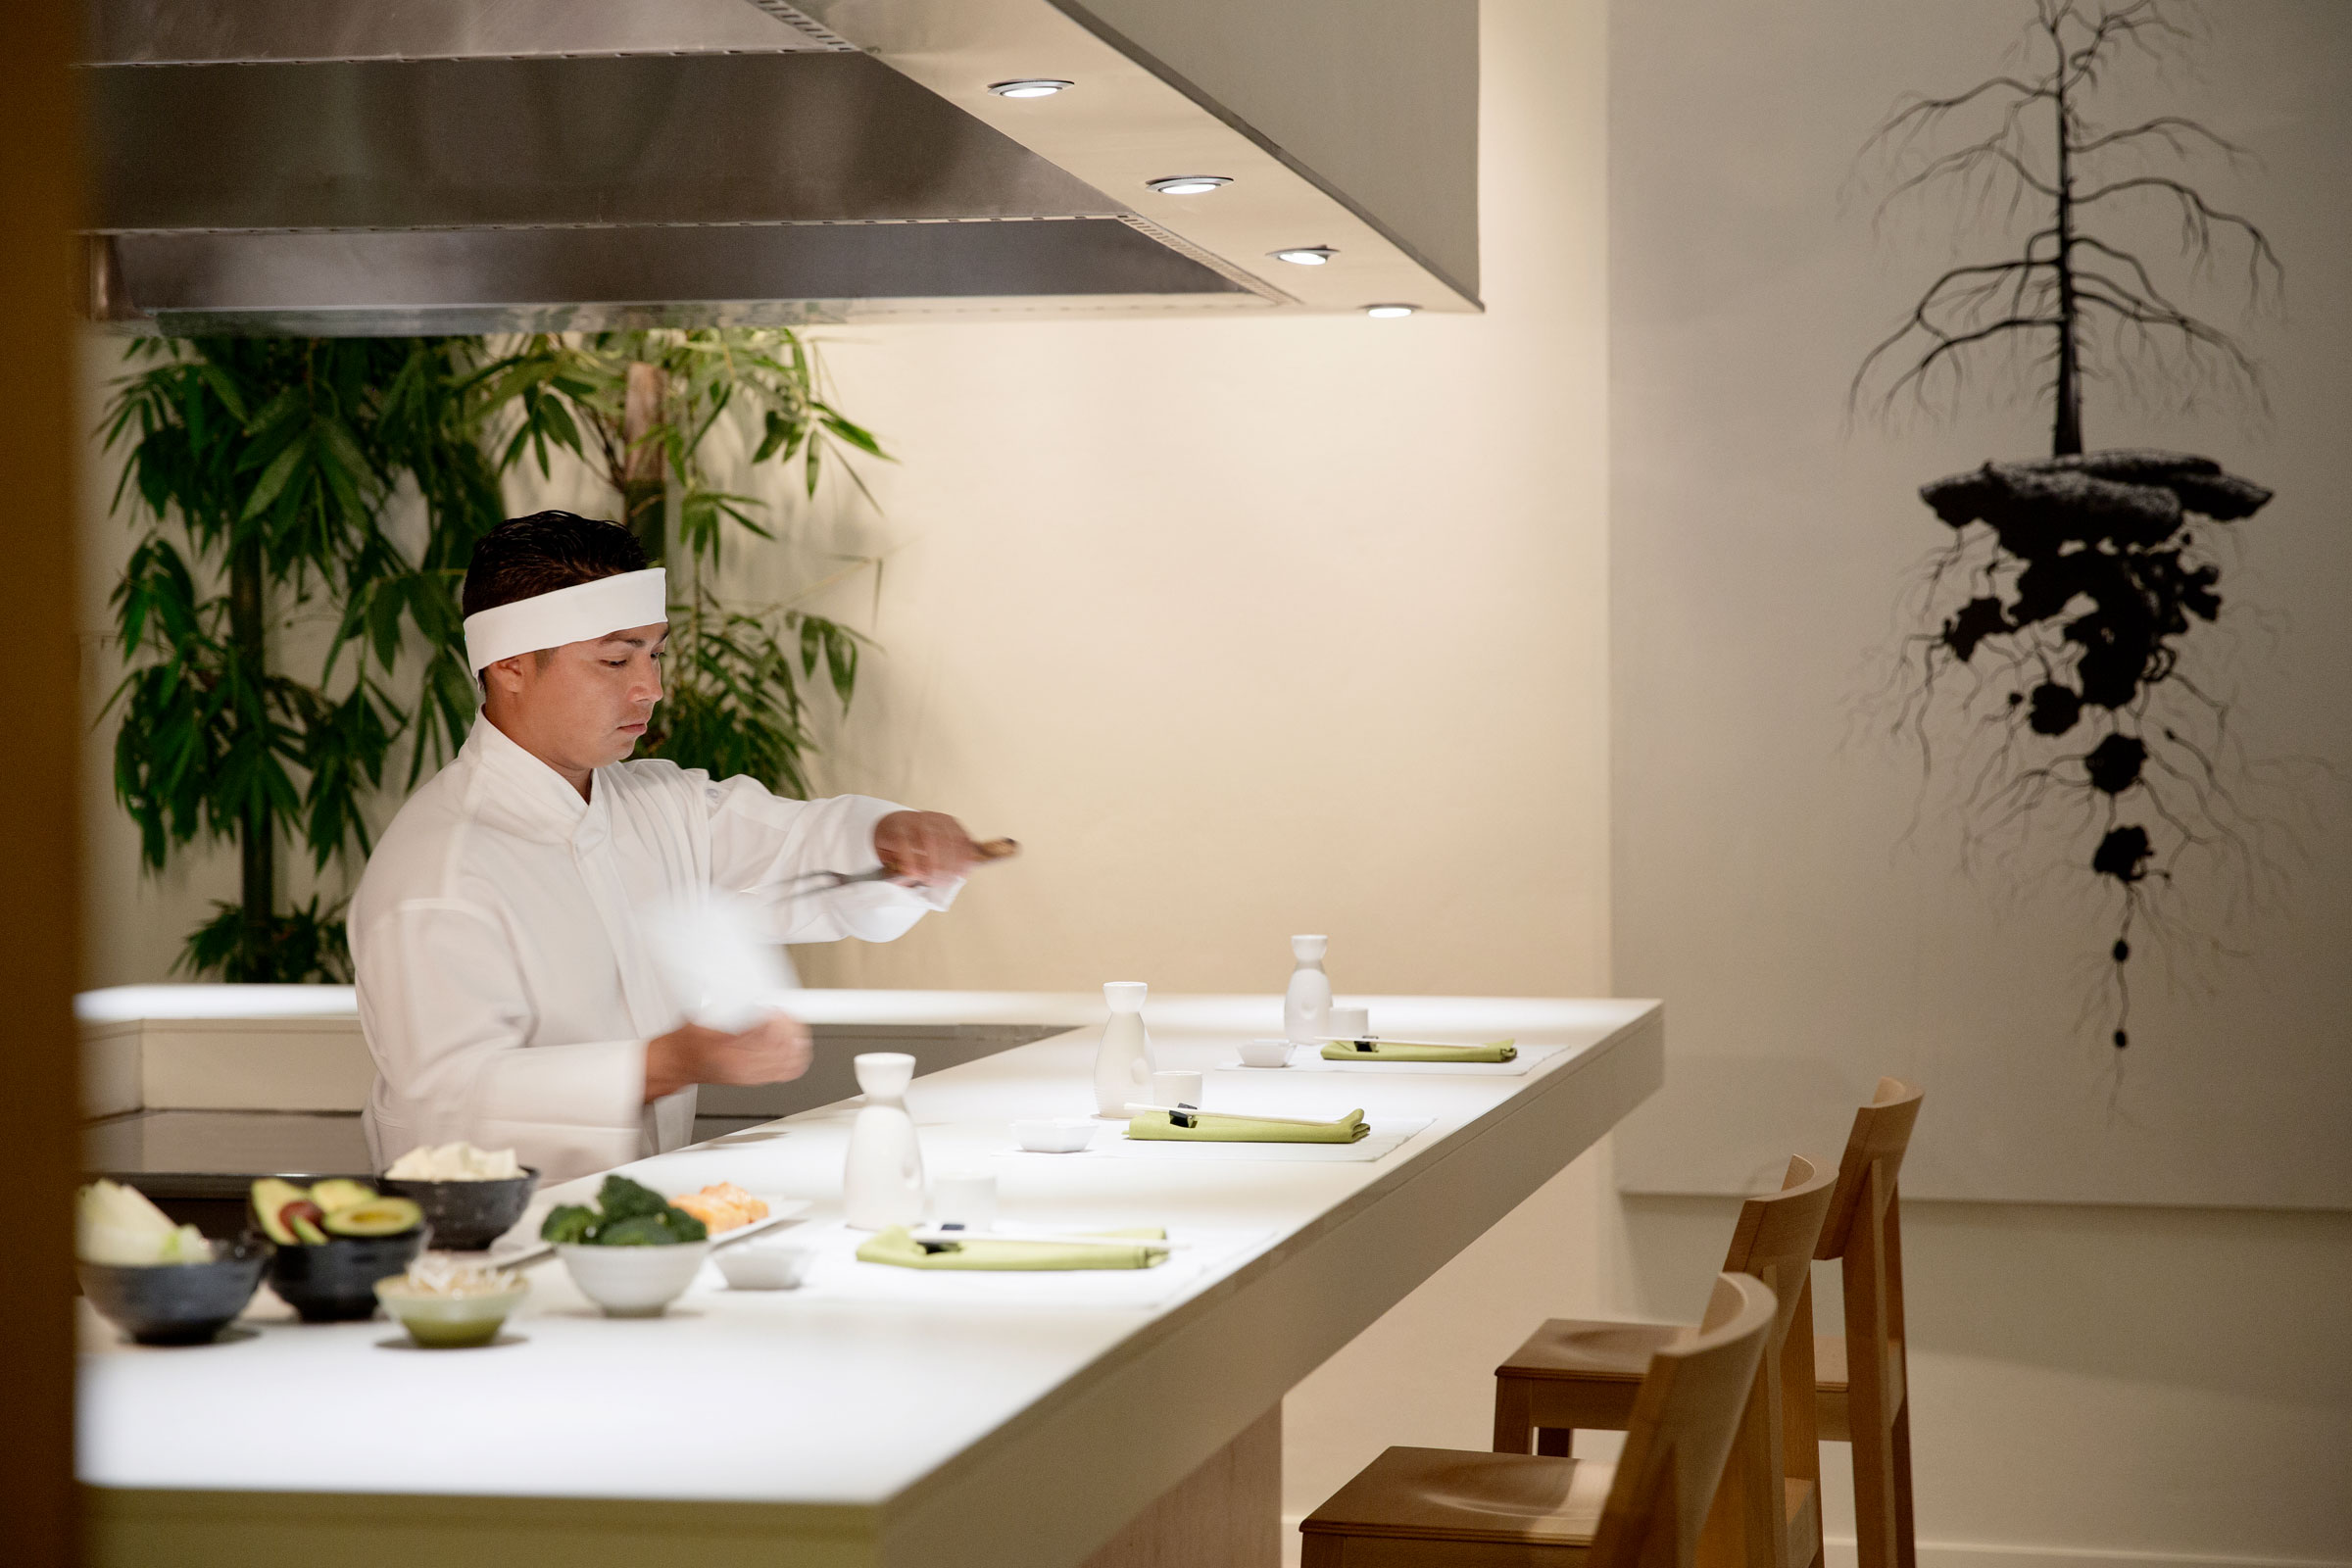 Shoji Restaurant at Finest Playa Mujeres offers you authentic Asian dishes